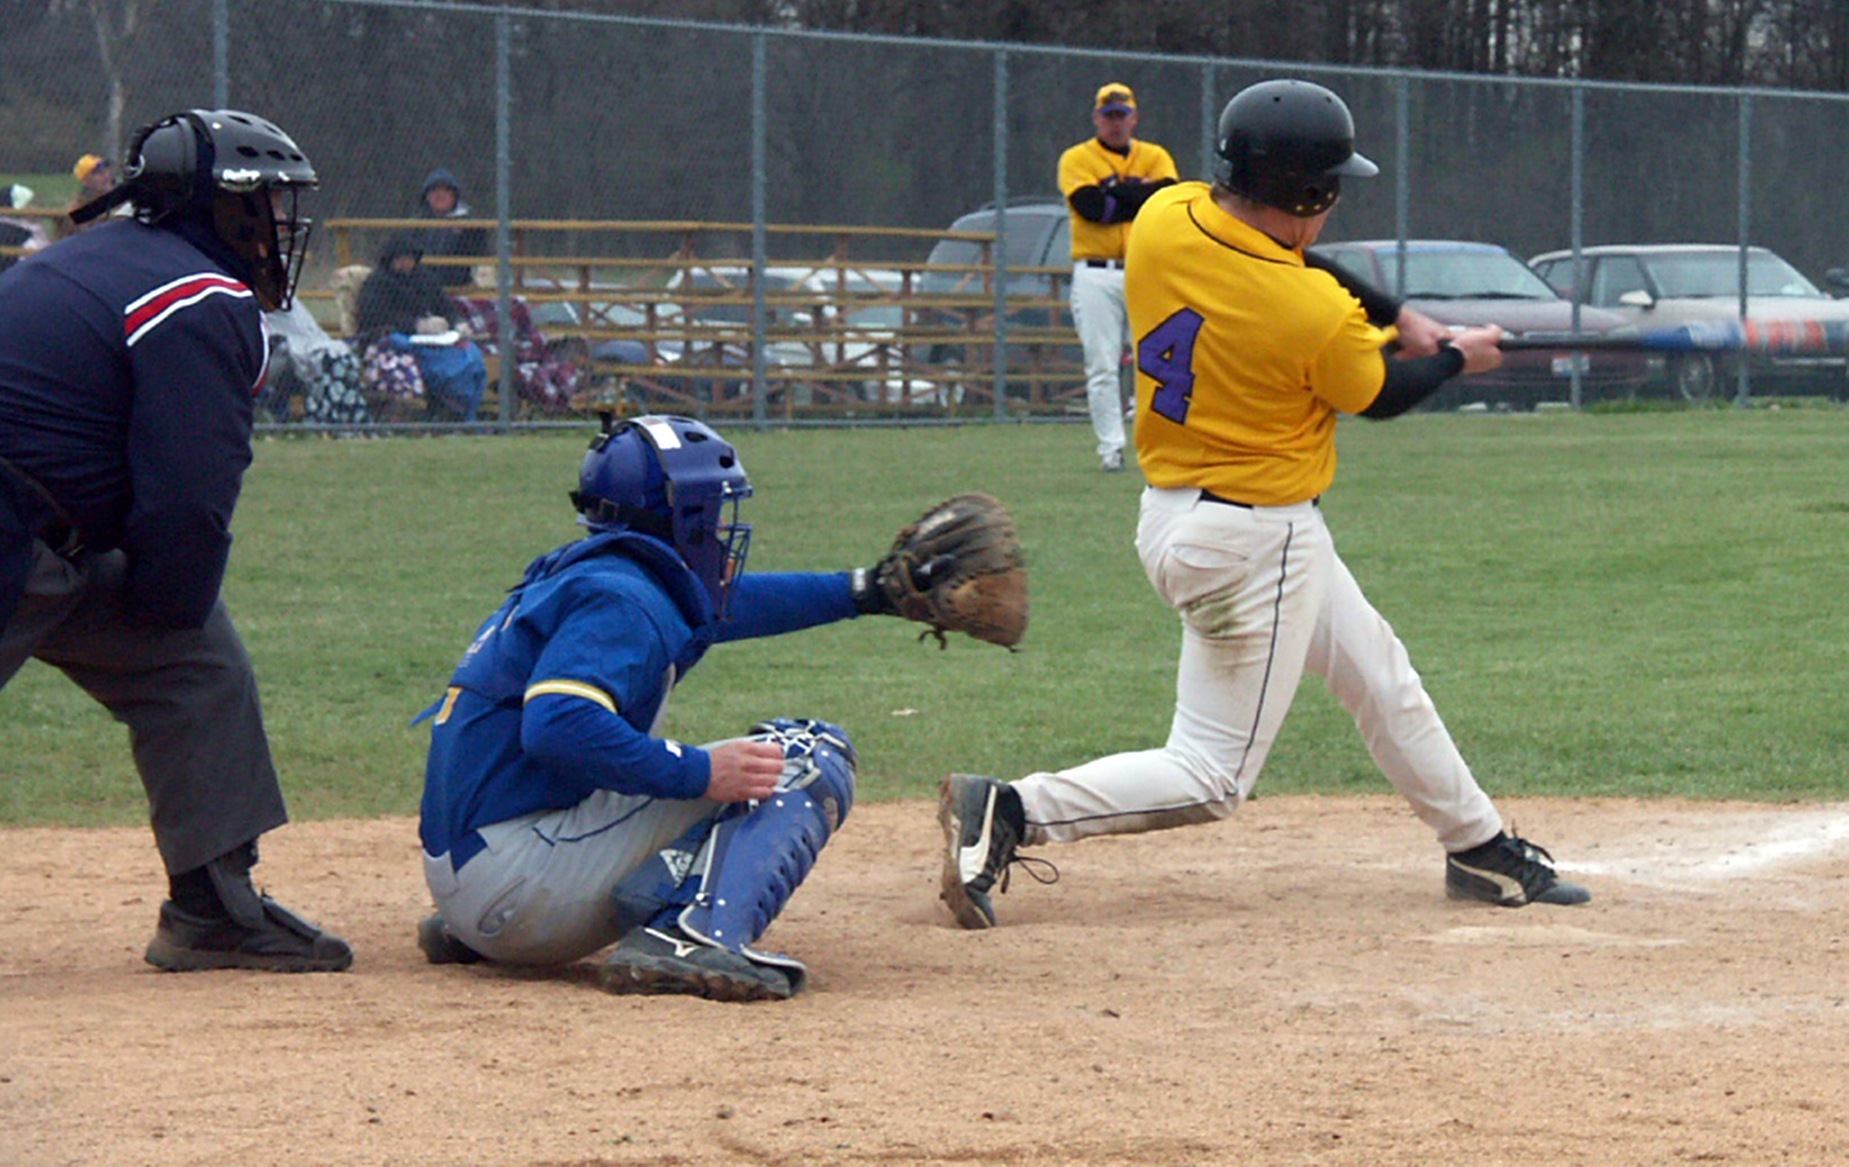 ONU Powers Past Jackets with Seven-Run Eighth